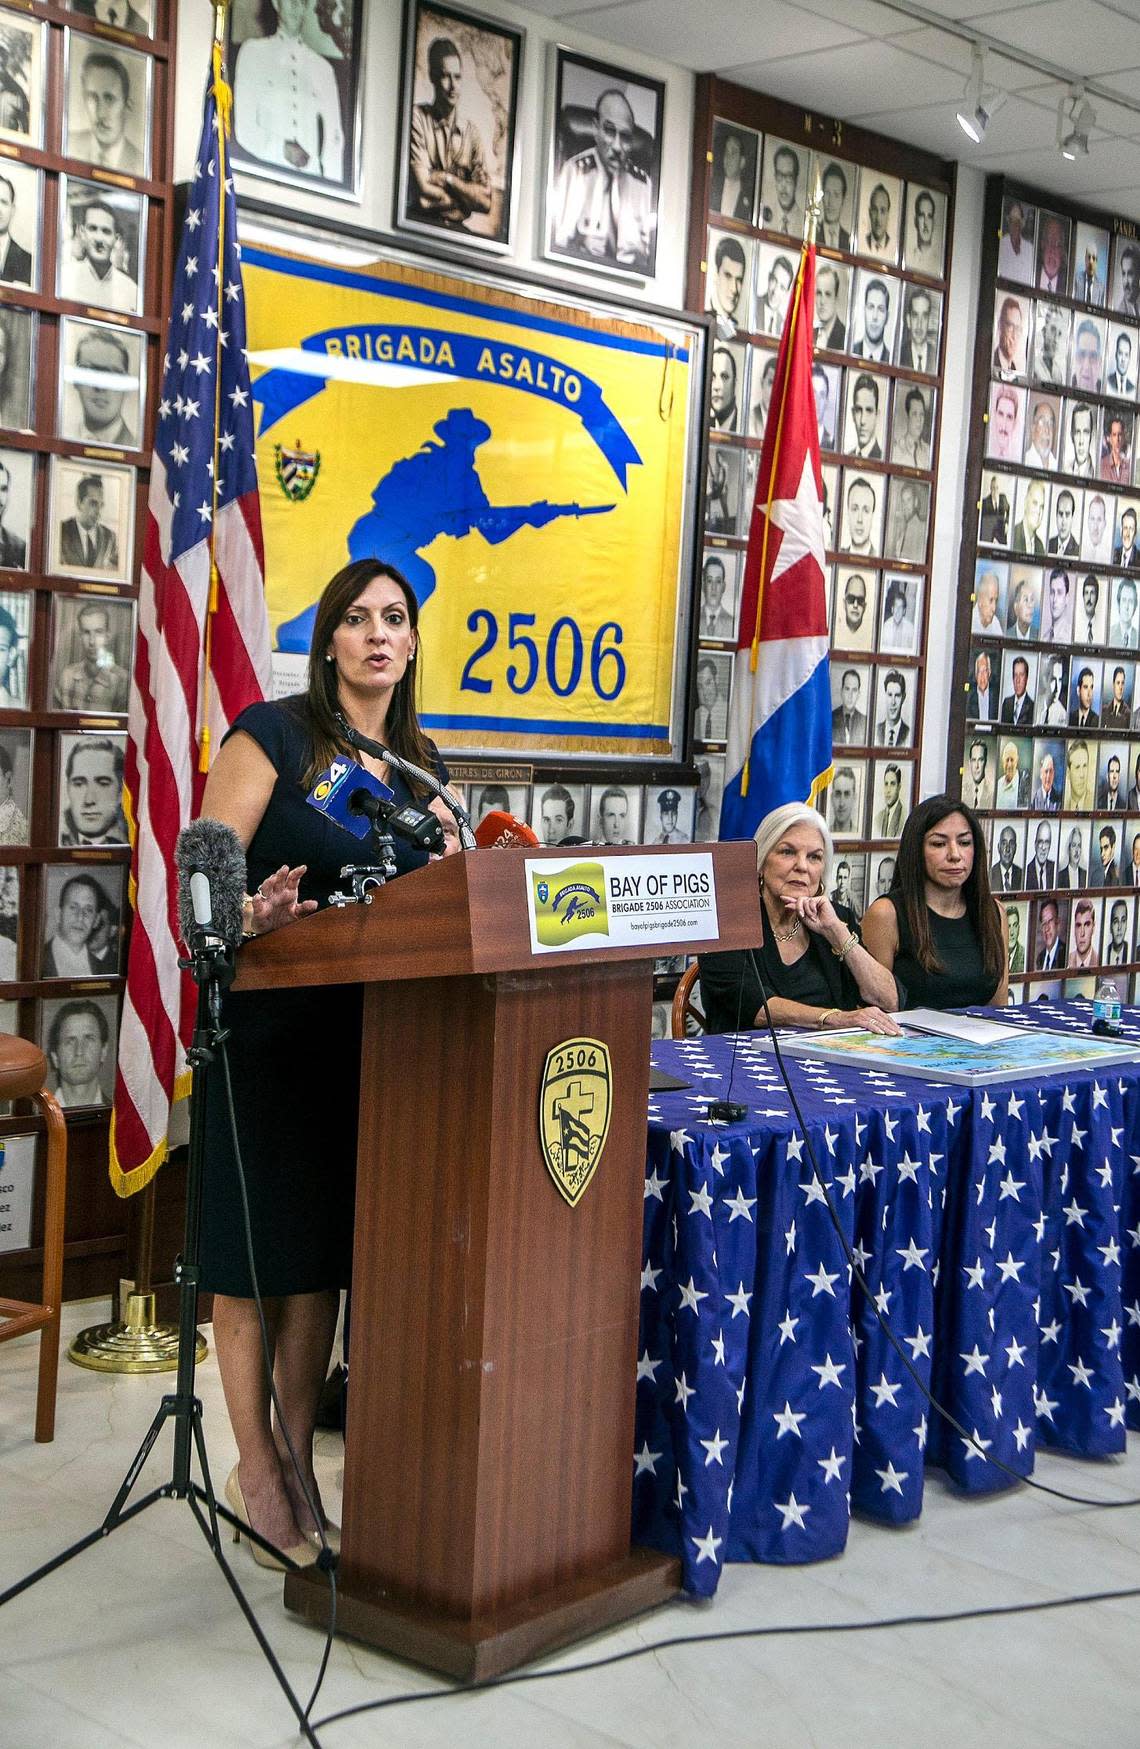 Florida Lt. Gov. Jeanette Nuñez speaks during a June 8 press conference called by leaders from the Cuban exile community at the Bay of Pigs Invasion’s Brigade 2506 headquarters in Little Havana to announce their position on the sale of Radio Mambi and WQBA, La Cubanisima to Latino Media Network.